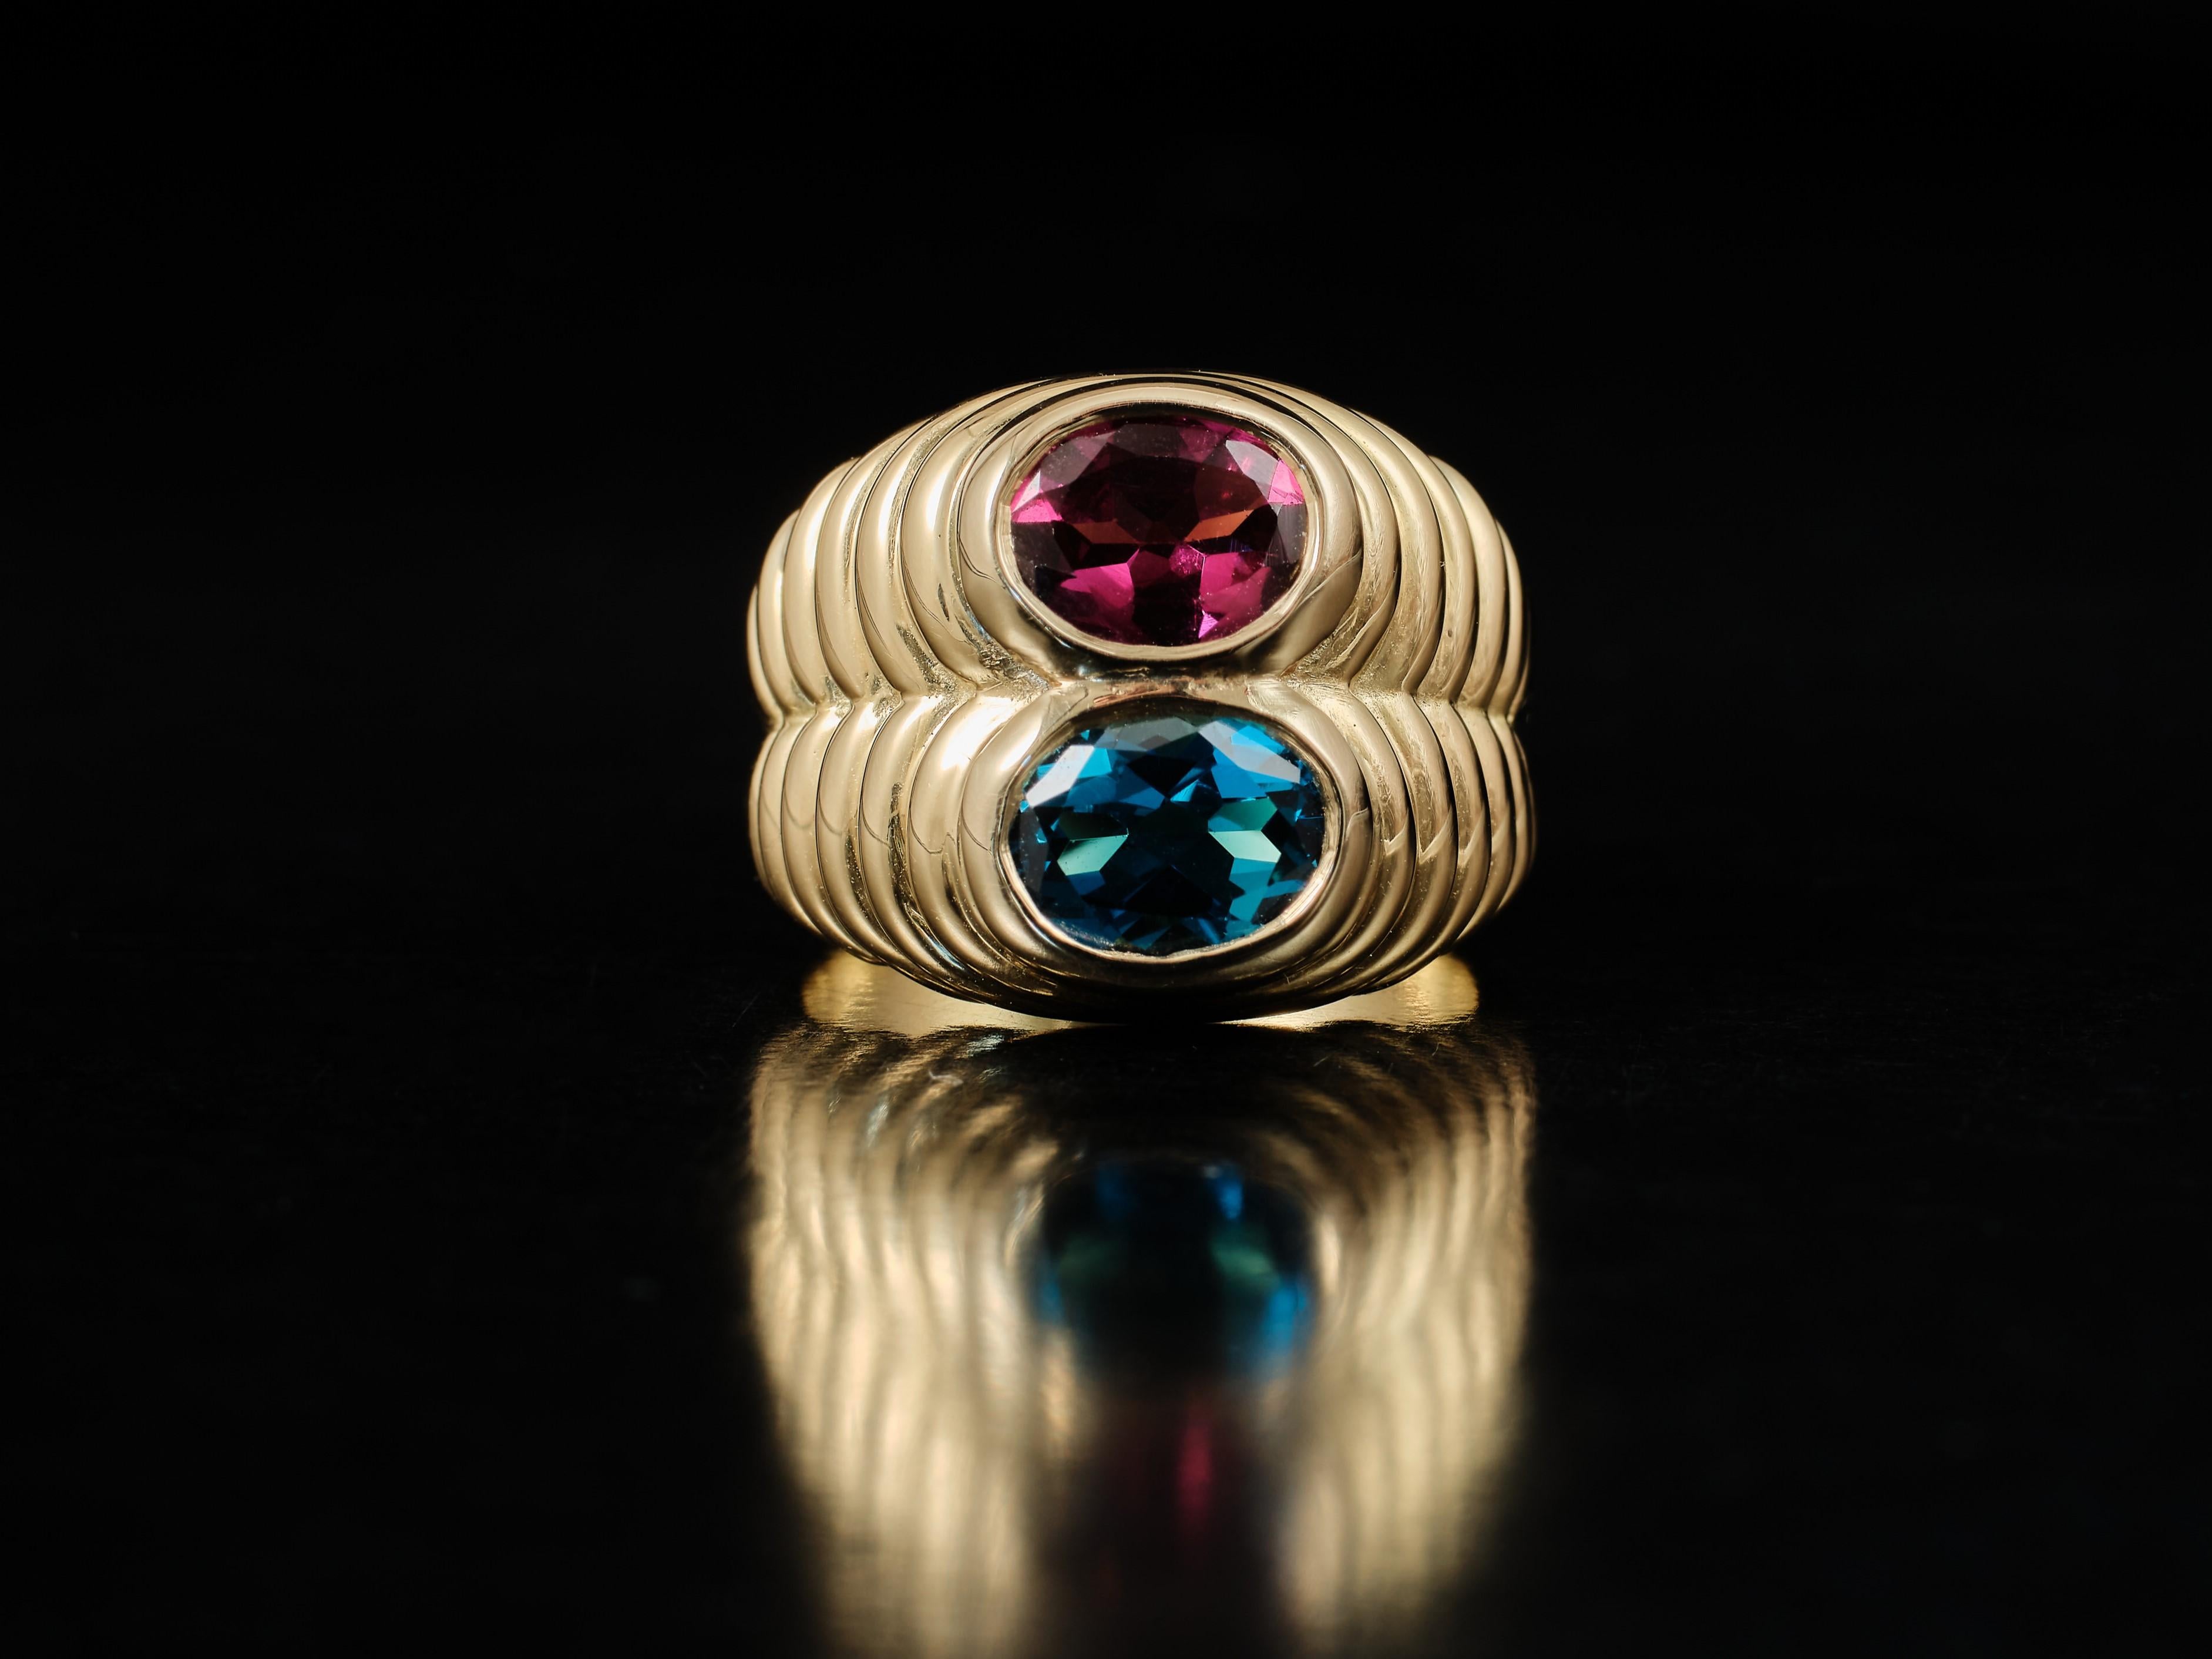 1980s Bulgari Doppio ring
A gem-set doppio ring by Bvlgari. Signature piece of design, created in Rome Italy by the acclaimed jewelry house of Bvlgari. This popular ring is part of the iconic doppio collection and was carefully hand-made with